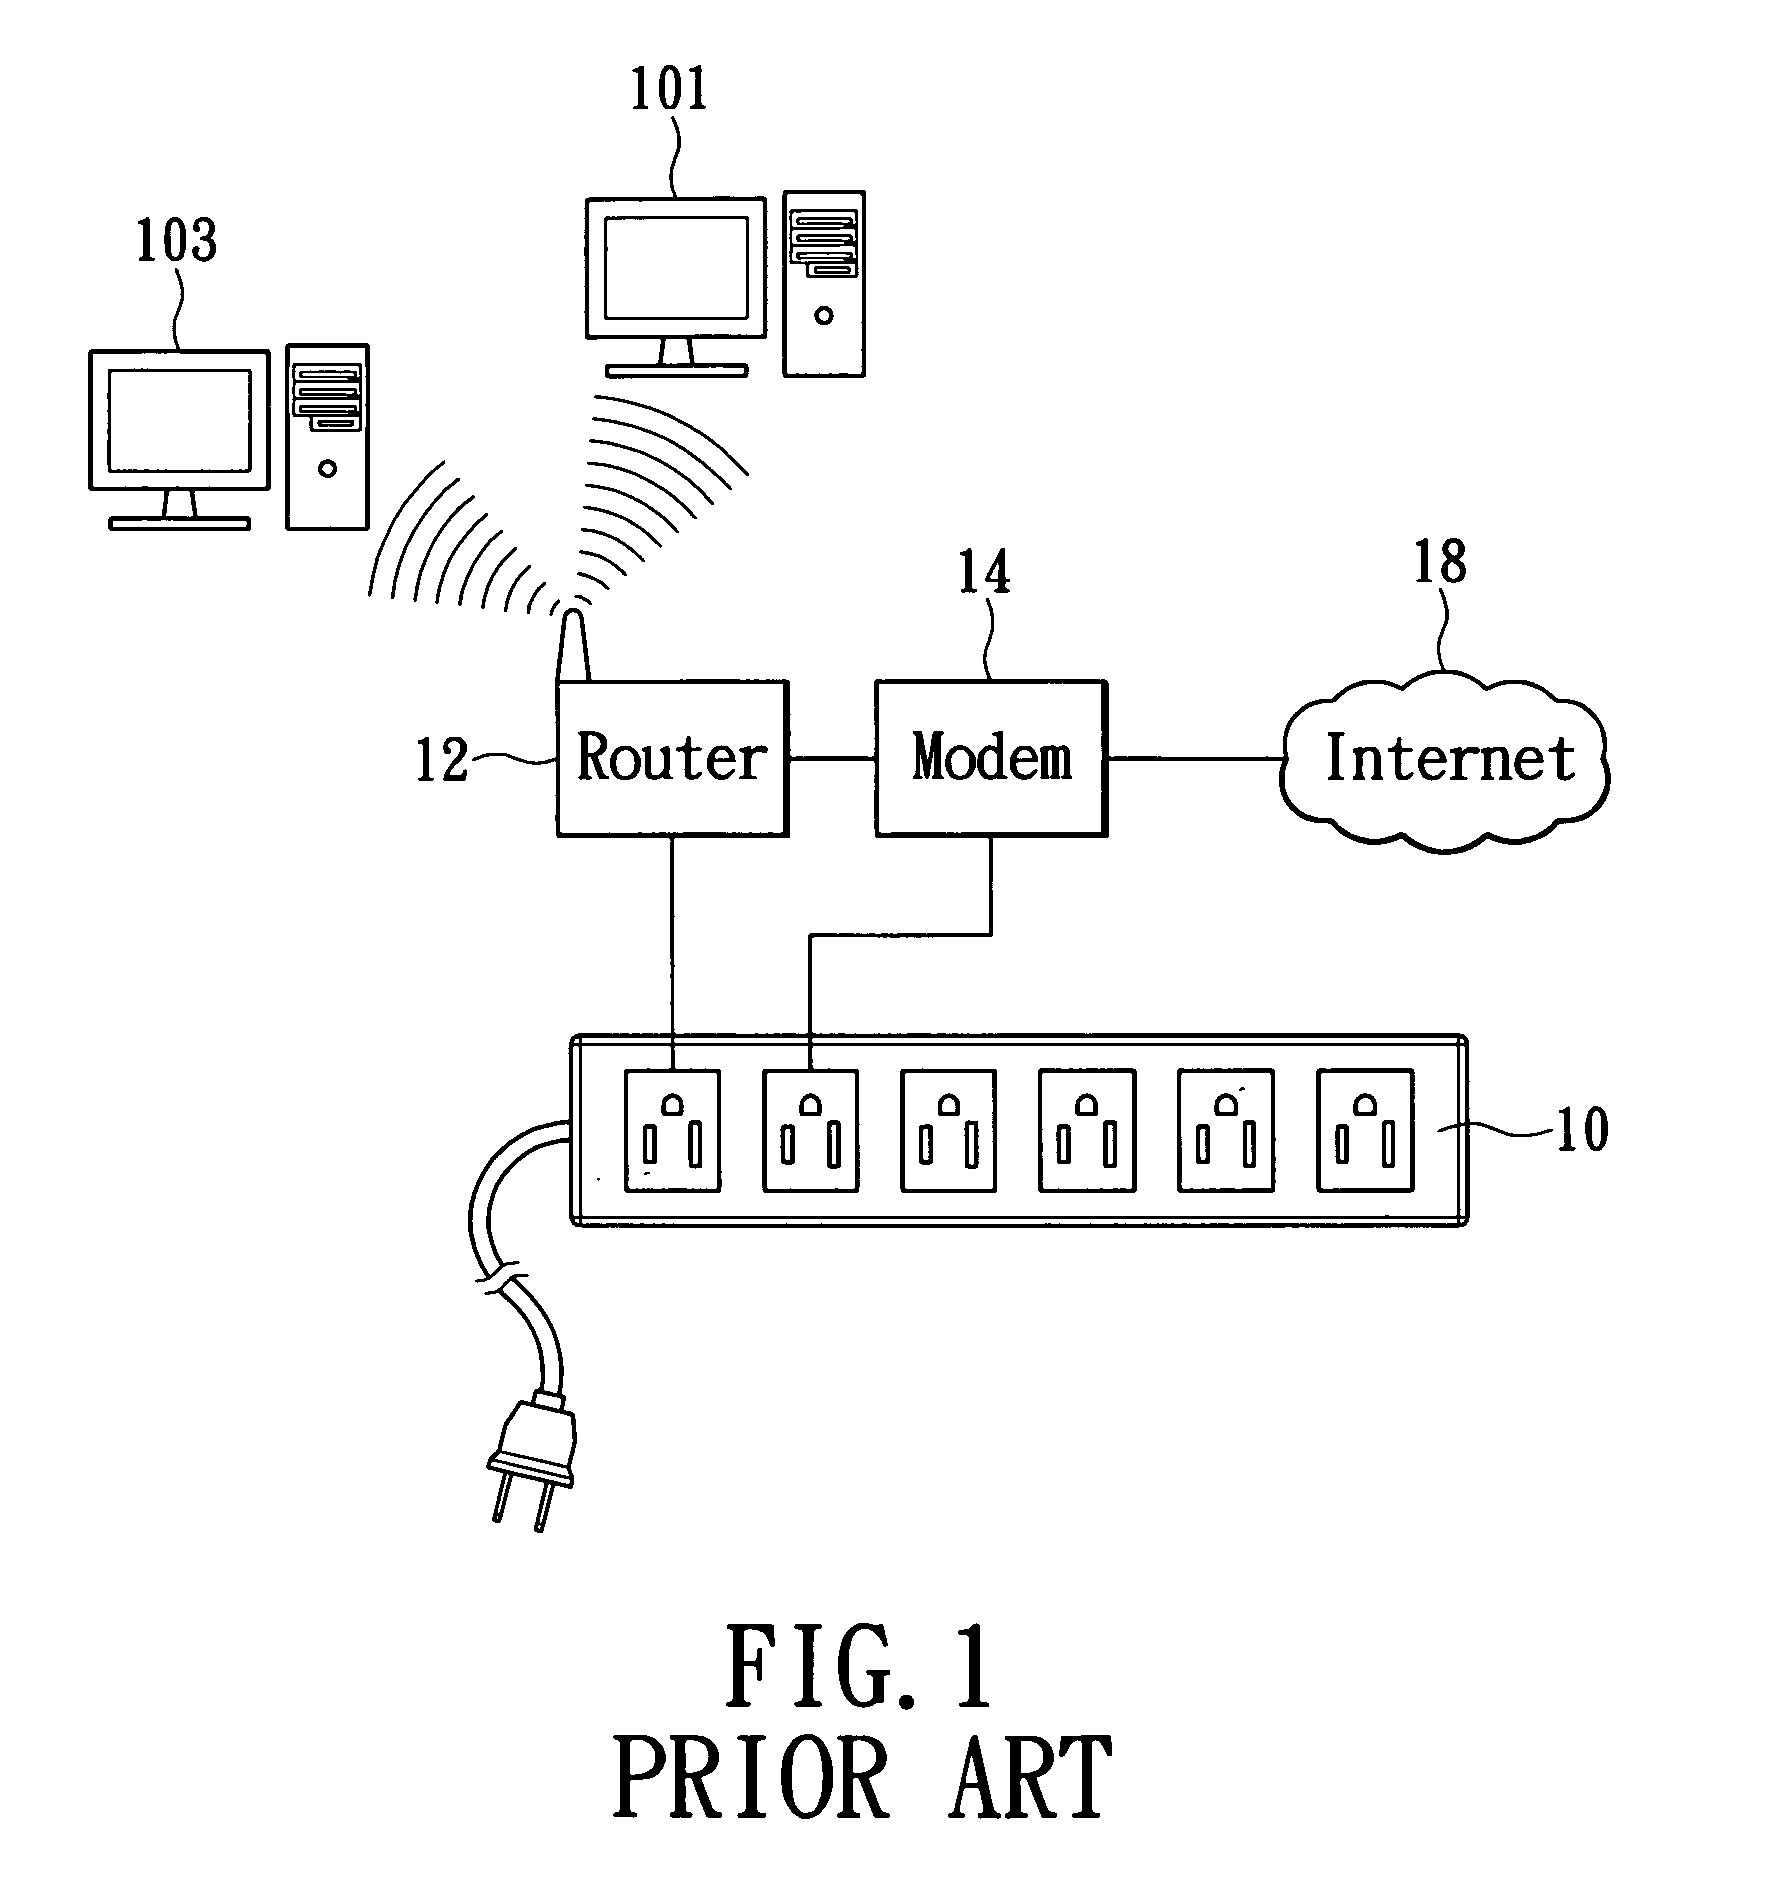 Apparatus power restart method in response to network connection status